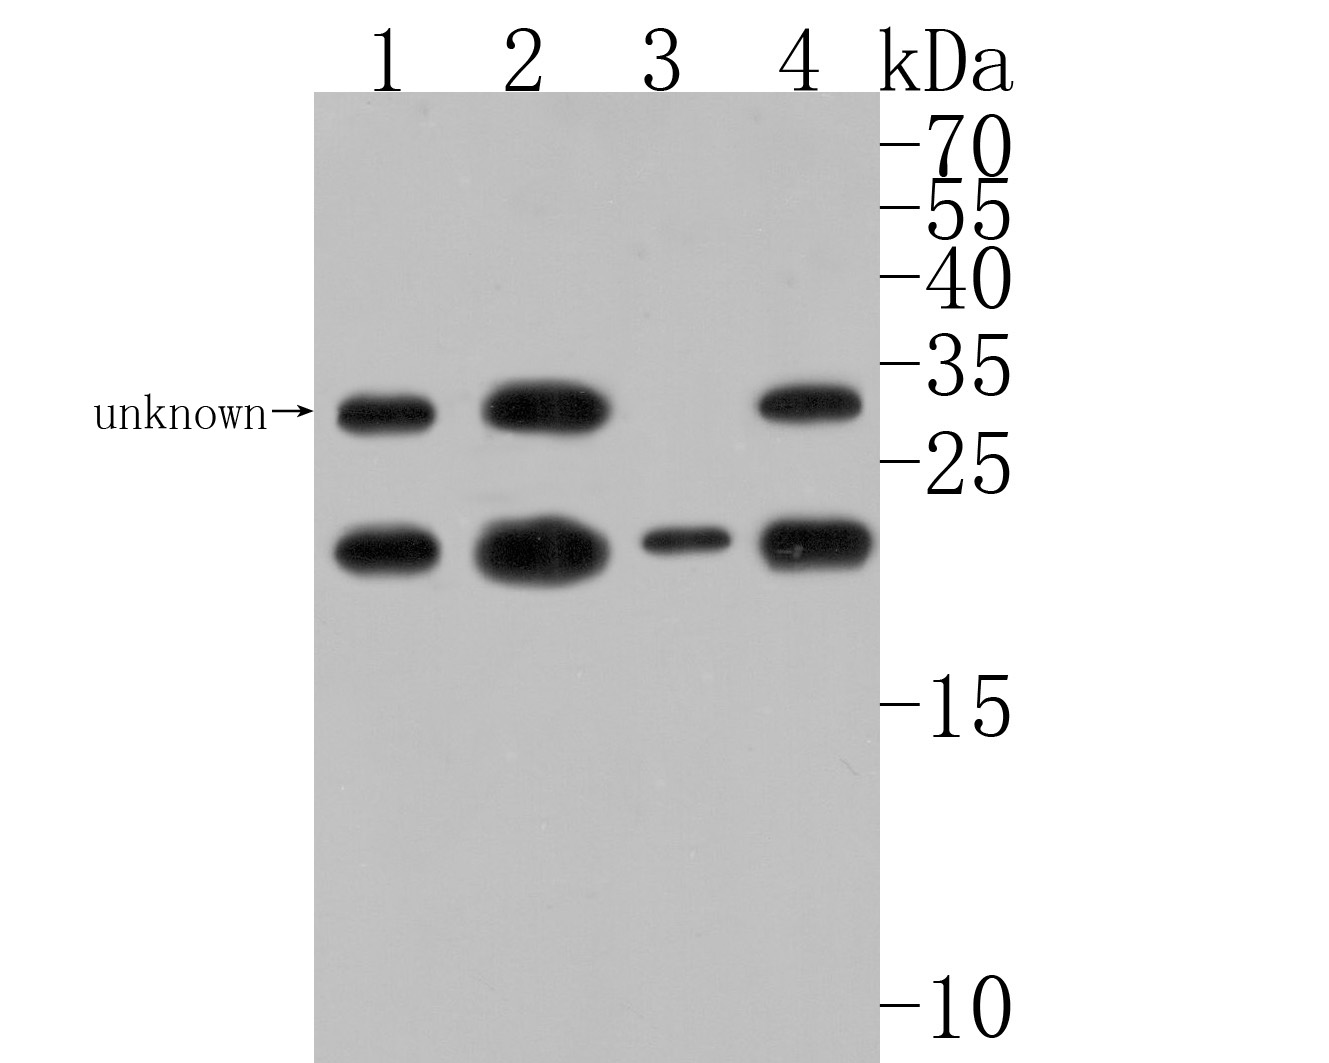 Western blot analysis of TCF21 on different lysates. Proteins were transferred to a PVDF membrane and blocked with 5% BSA in PBS for 1 hour at room temperature. The primary antibody (HA500188, 1/500) was used in 5% BSA at room temperature for 2 hours. Goat Anti-Rabbit IgG - HRP Secondary Antibody (HA1001) at 1:5,000 dilution was used for 1 hour at room temperature.<br />
Positive control: <br />
Lane 1: Hela cell lysate<br />
Lane 2: 293T cell lysate<br />
Lane 3: K562 cell lysate<br />
Lane 4: Human lung tissue lysate